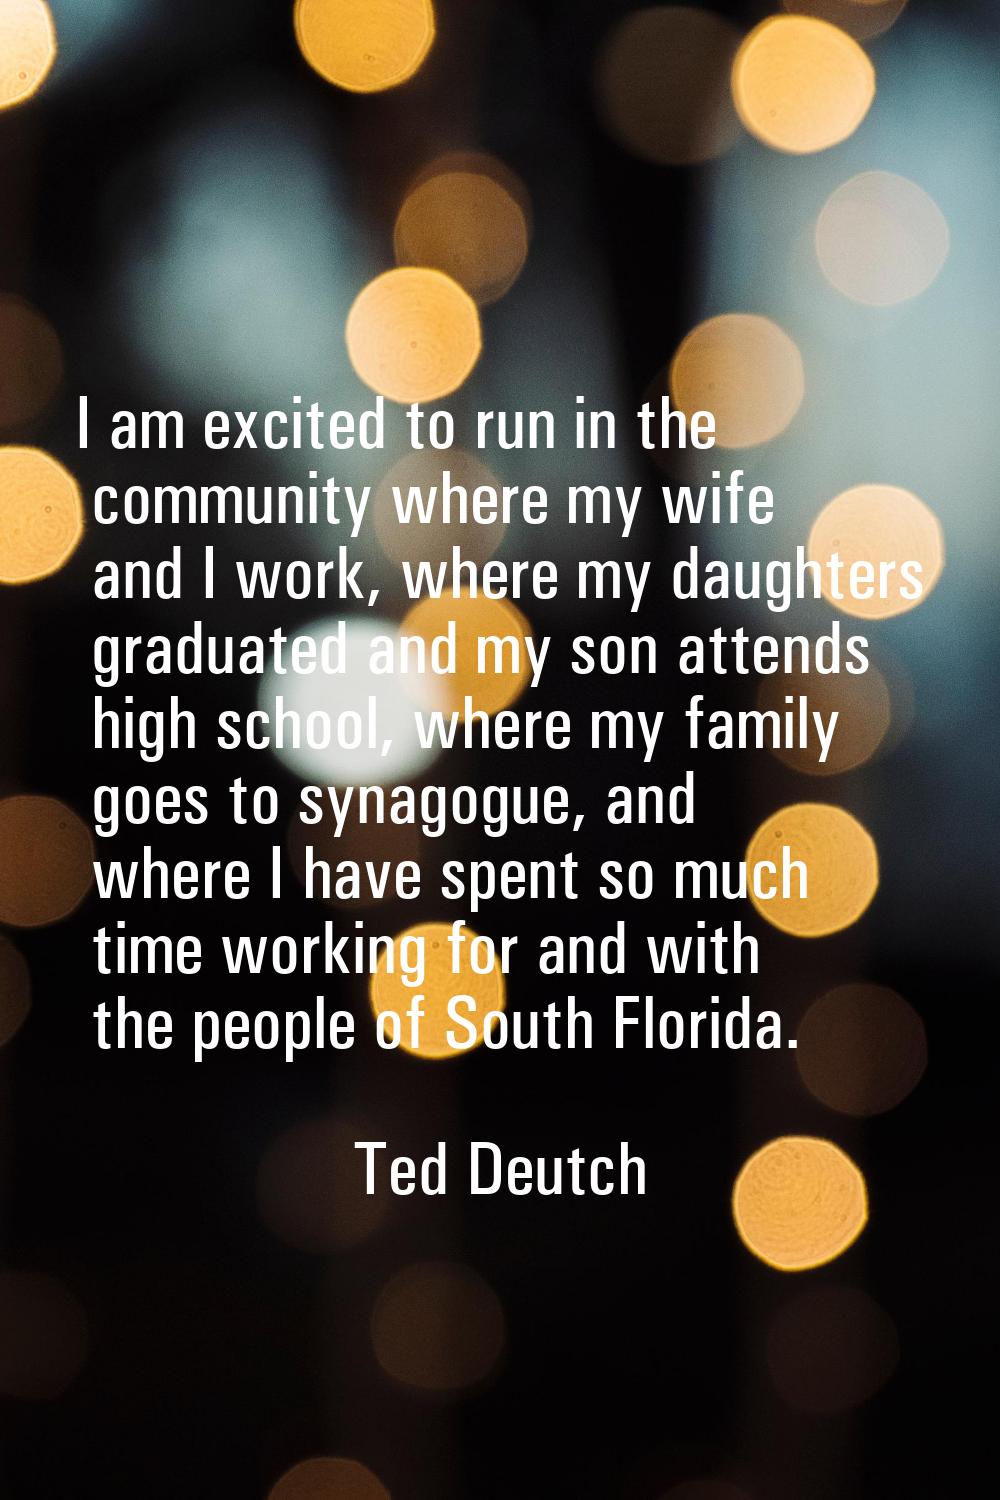 I am excited to run in the community where my wife and I work, where my daughters graduated and my 